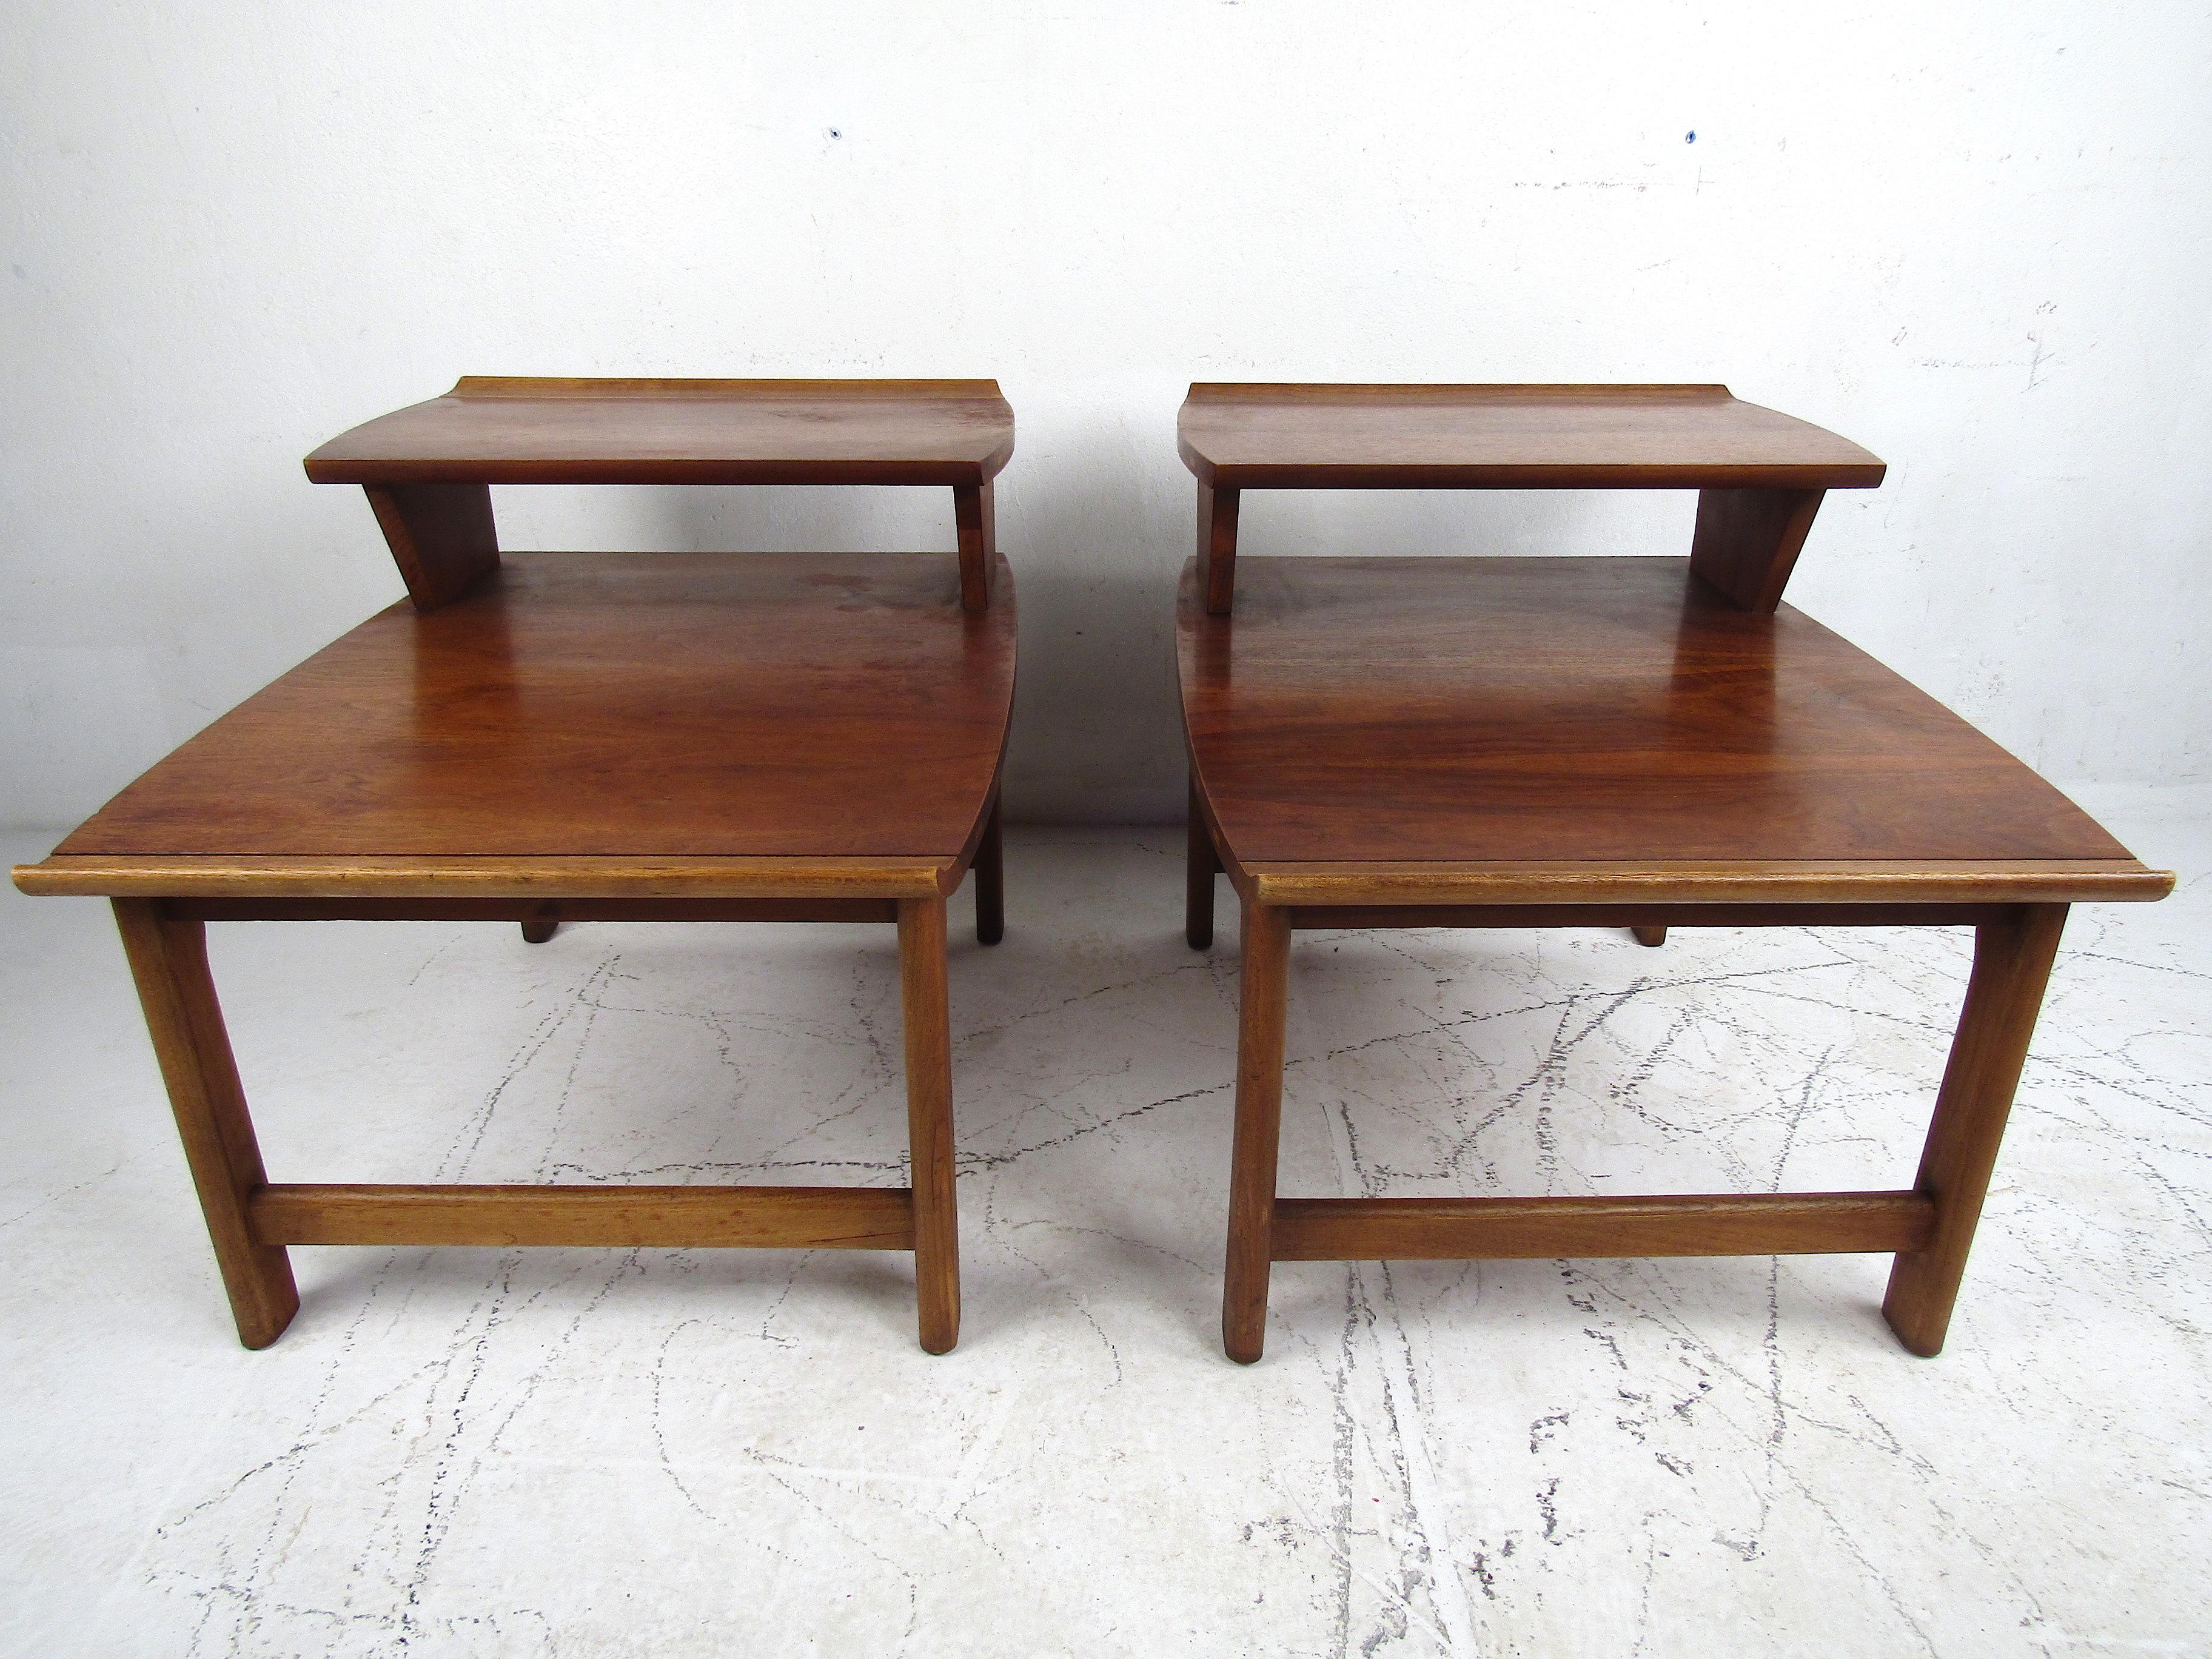 Stylish pair of Mid-Century Modern side tables manufactured by Lane Furniture Co., circa 1965. Sturdy design with interesting joinery and accents across the sides of the tables. Sure to complement and modern interior. Please confirm item location